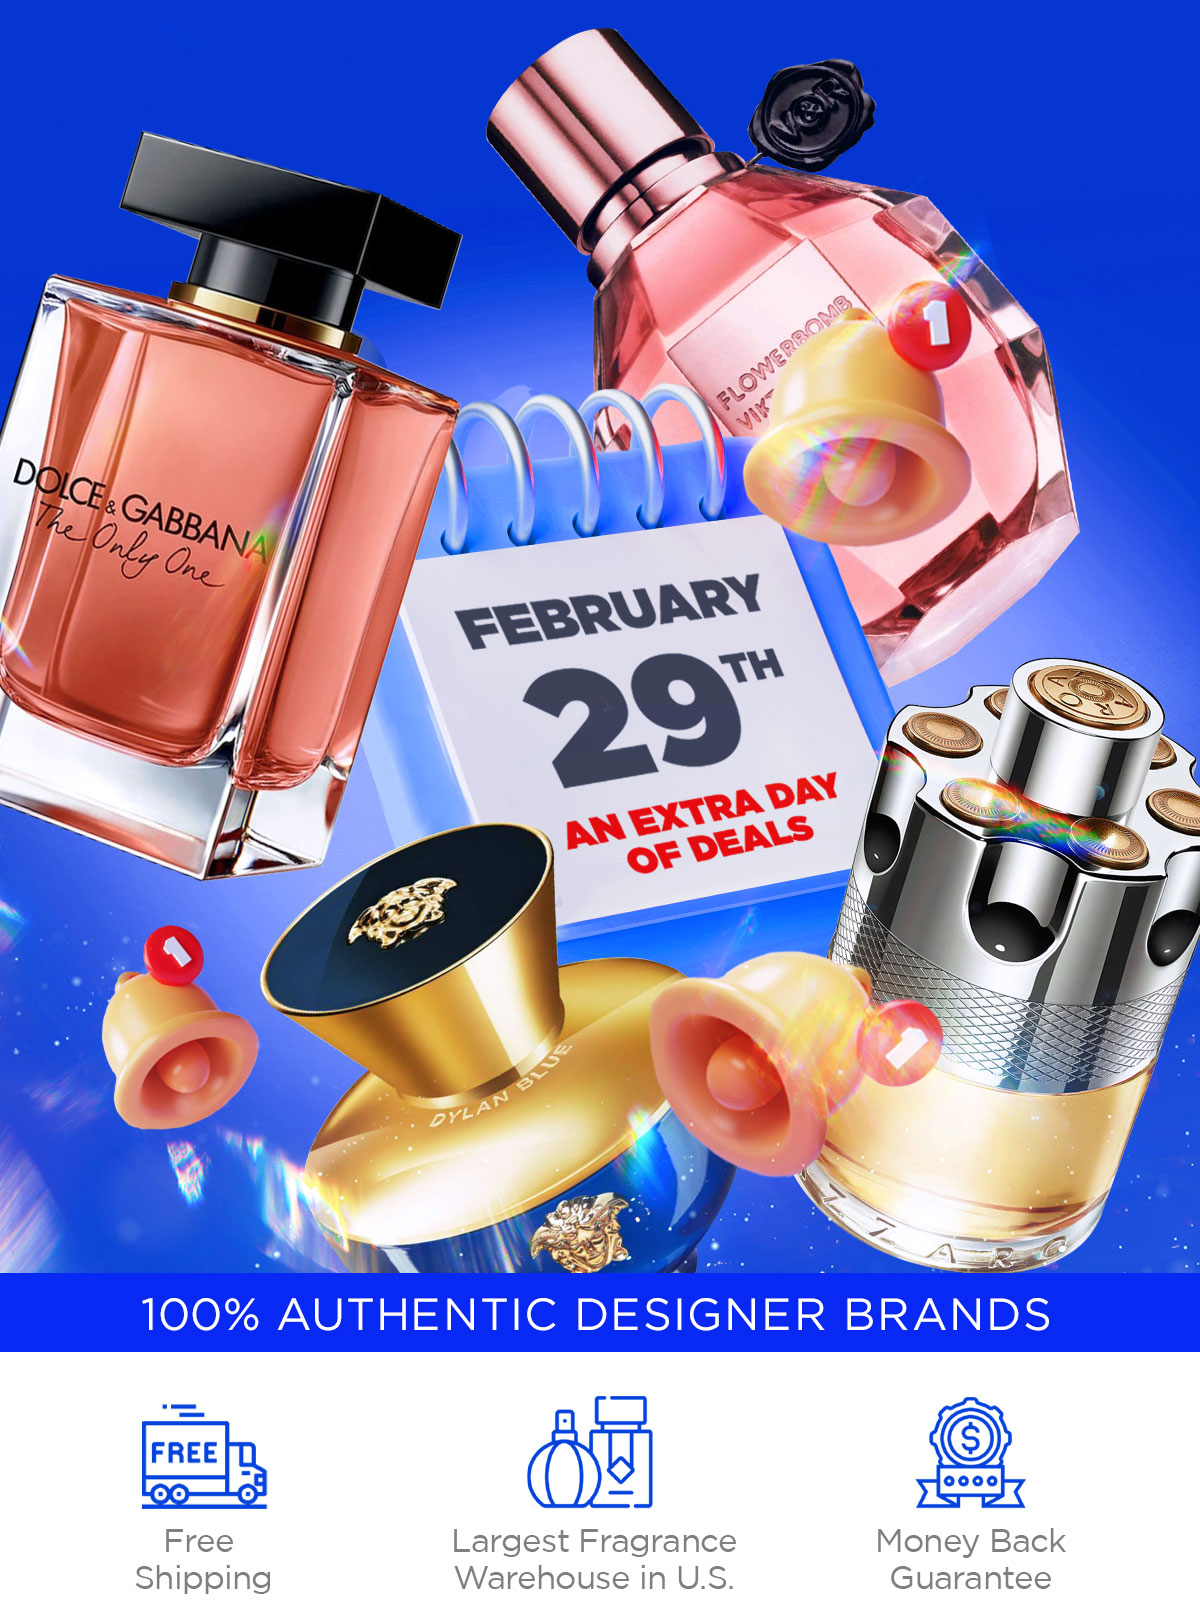 Popular fragrances are displayed around a calendar advertising Leap Year deals